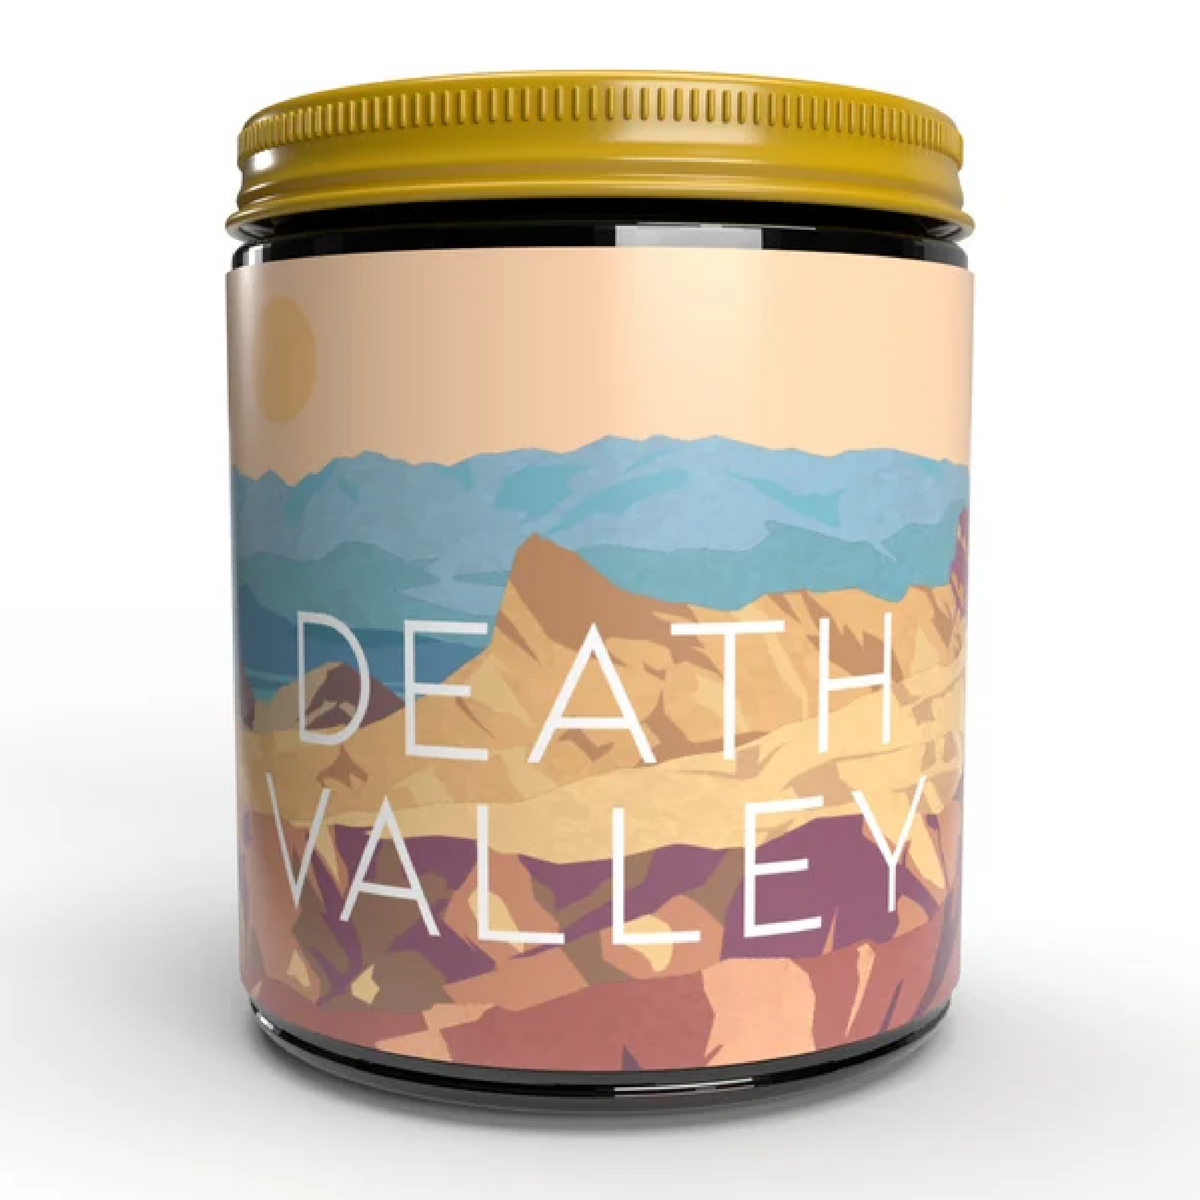 Death Valley National Park Soy Wax Candle - 9oz